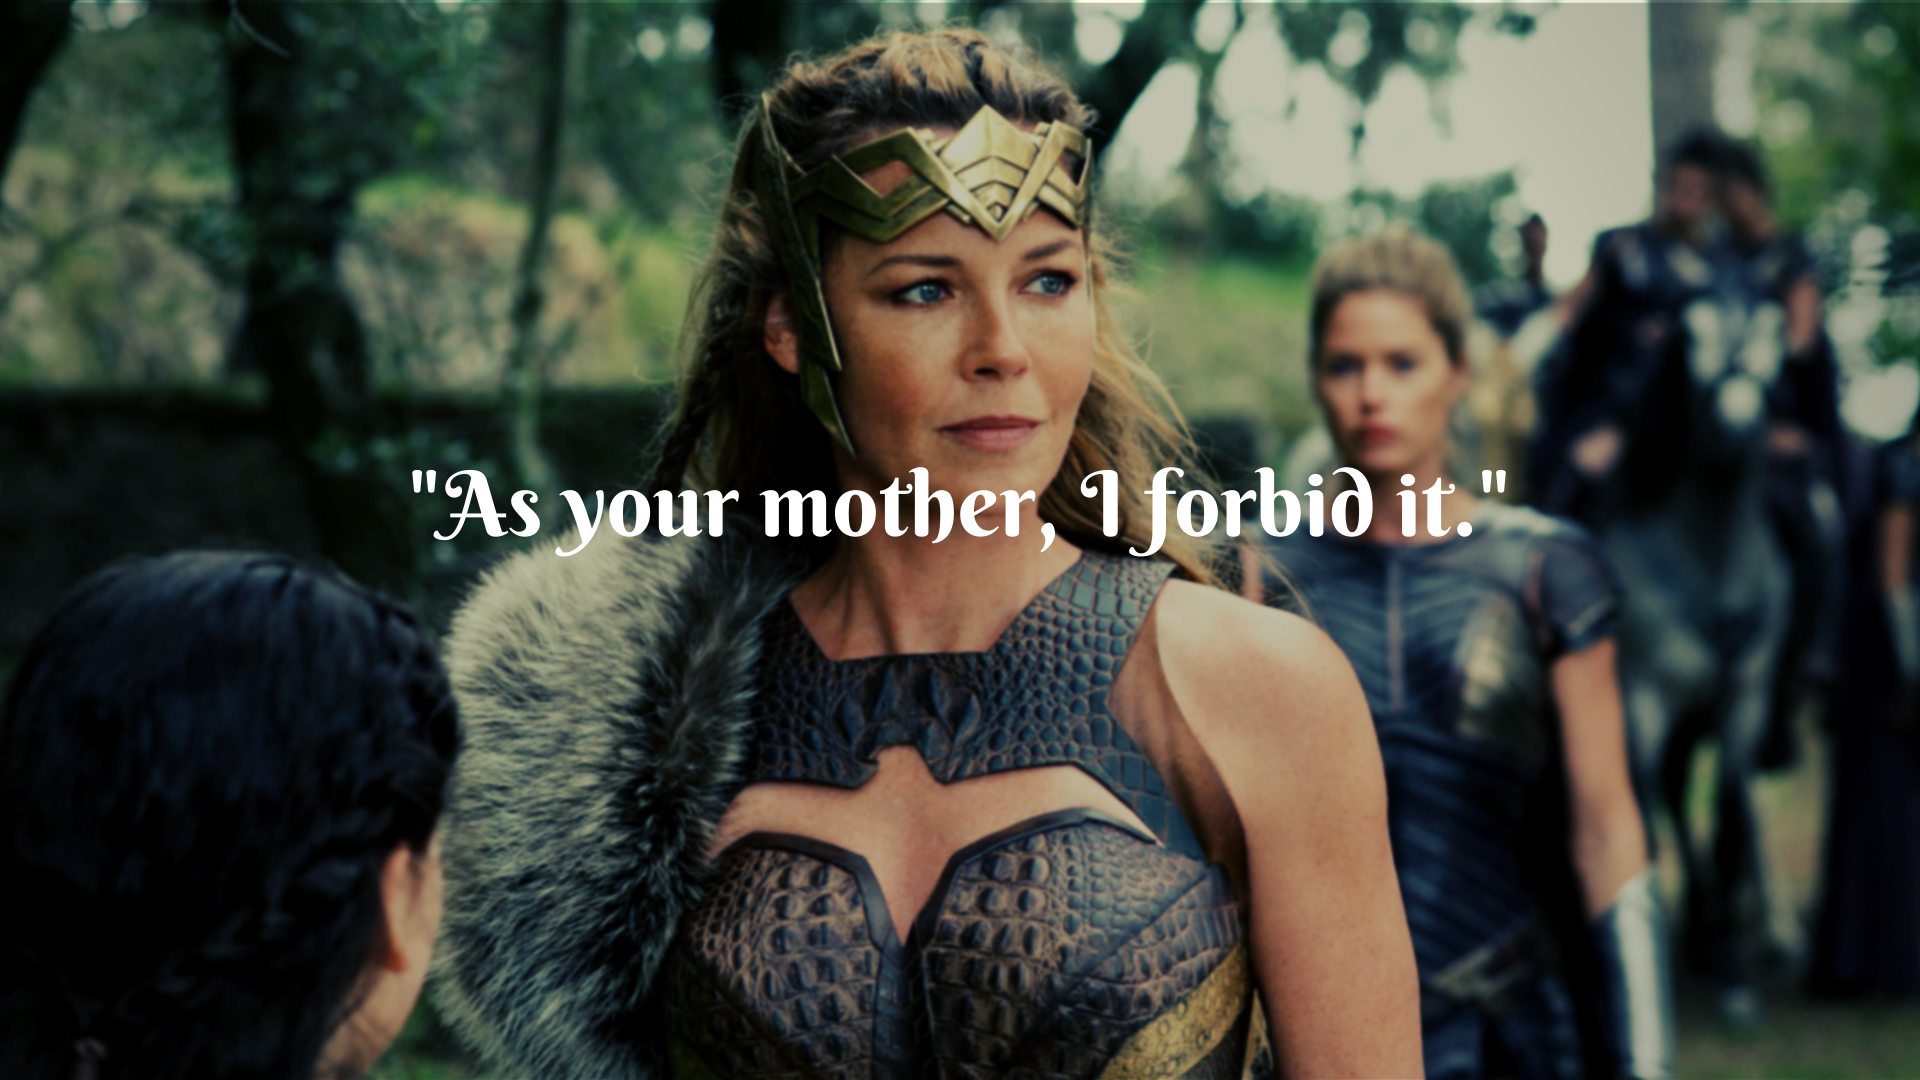 Meme from movie Wonder Woman showing the protagonist’s mother’s disapproval